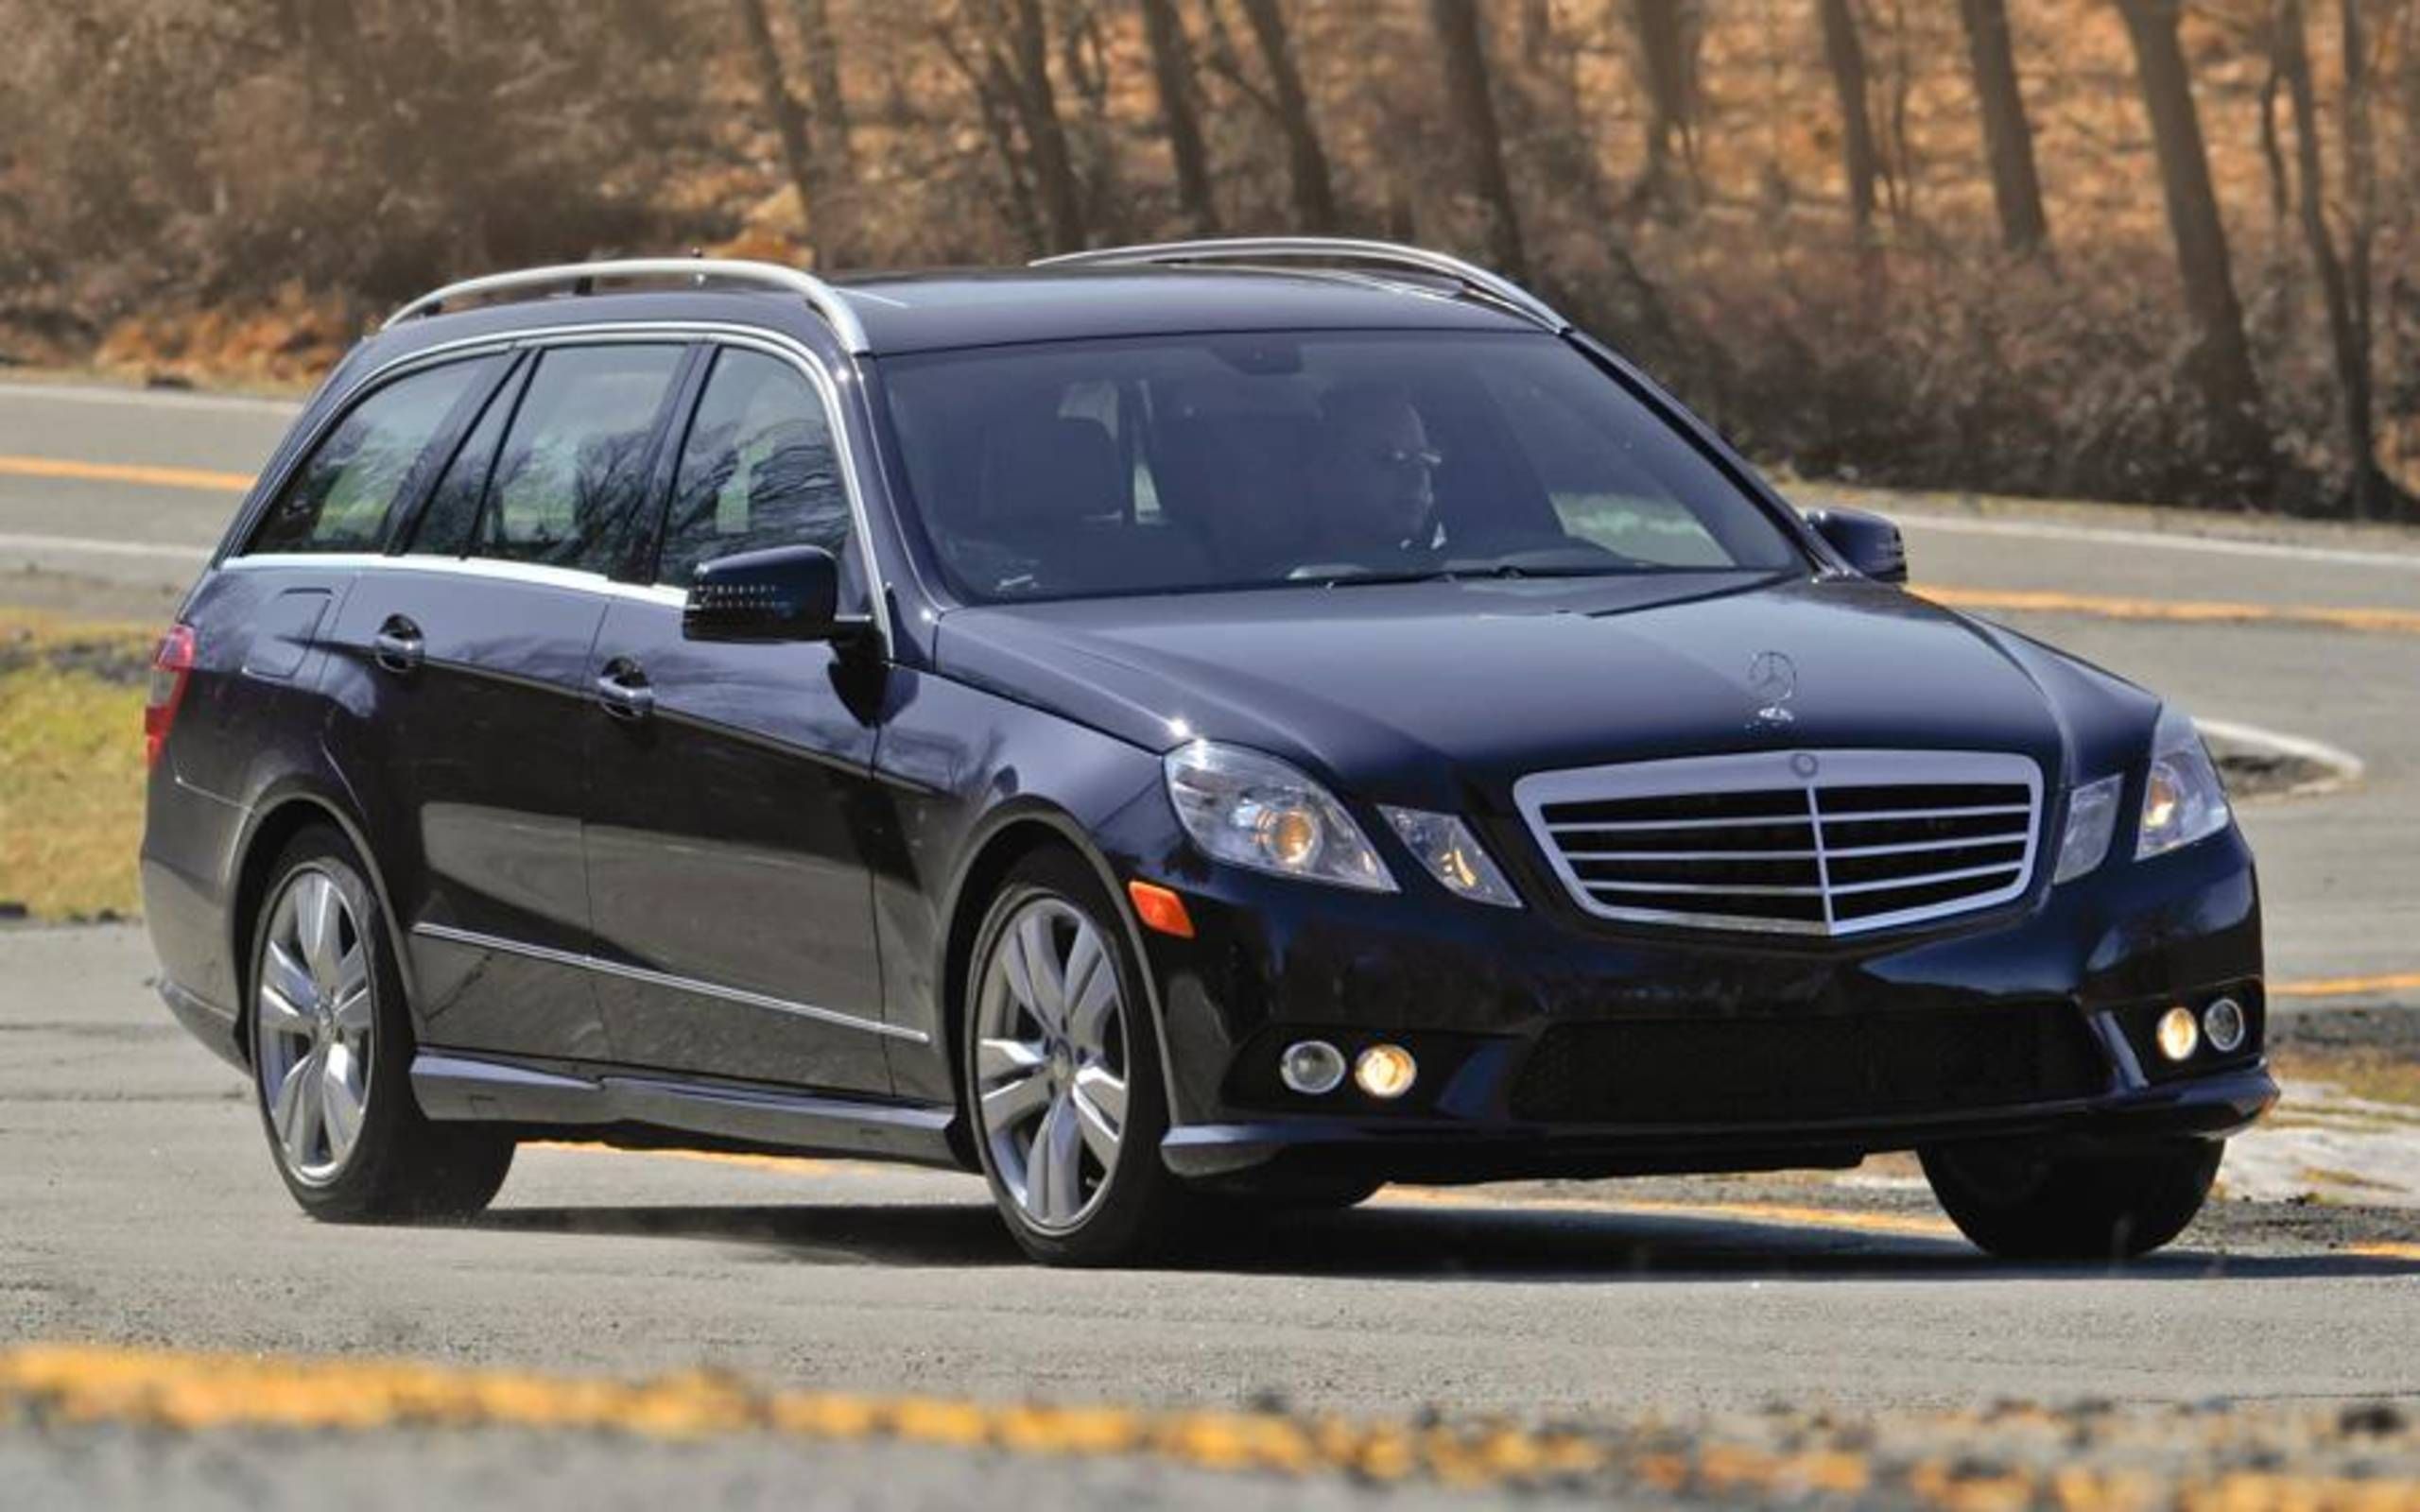 11 Mercedes Benz 50 4matic Wagon Review Notes Comfort Luxury And Utility Equal A Wagon We Like